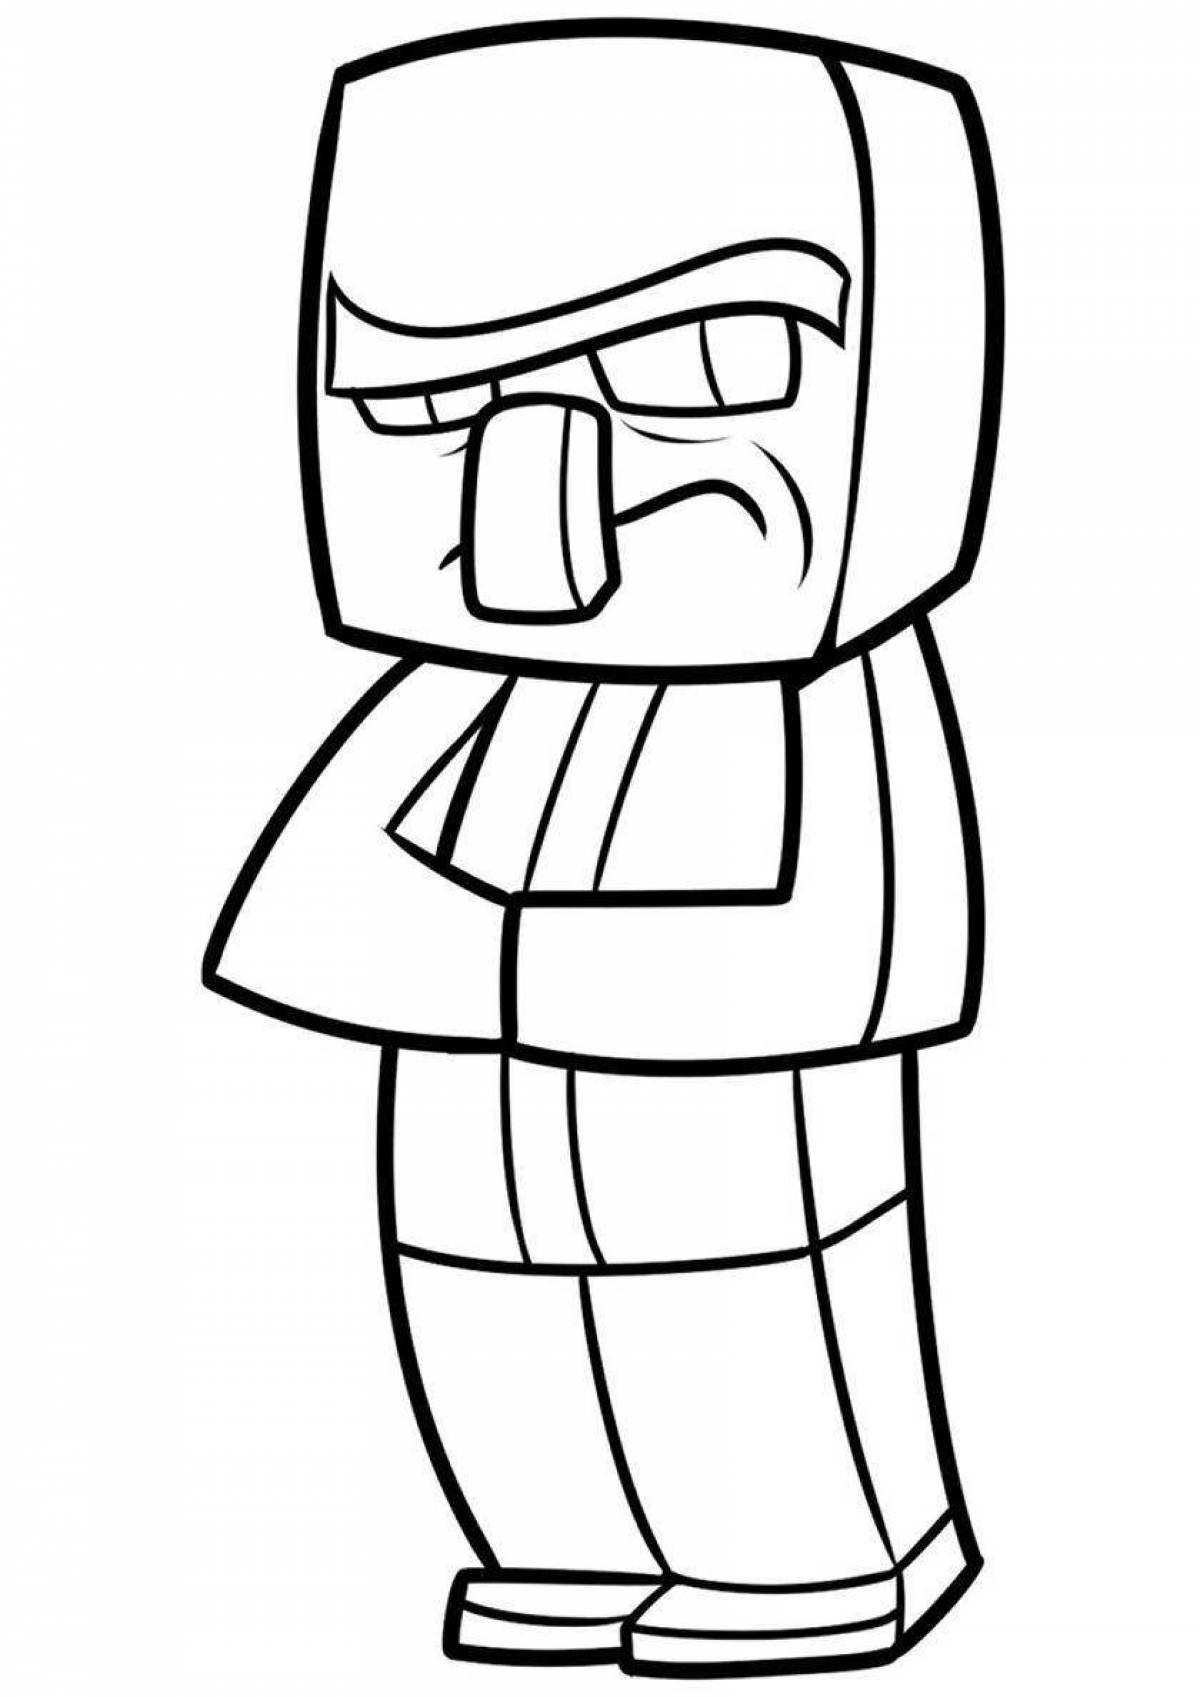 Exciting minecraft resident coloring page